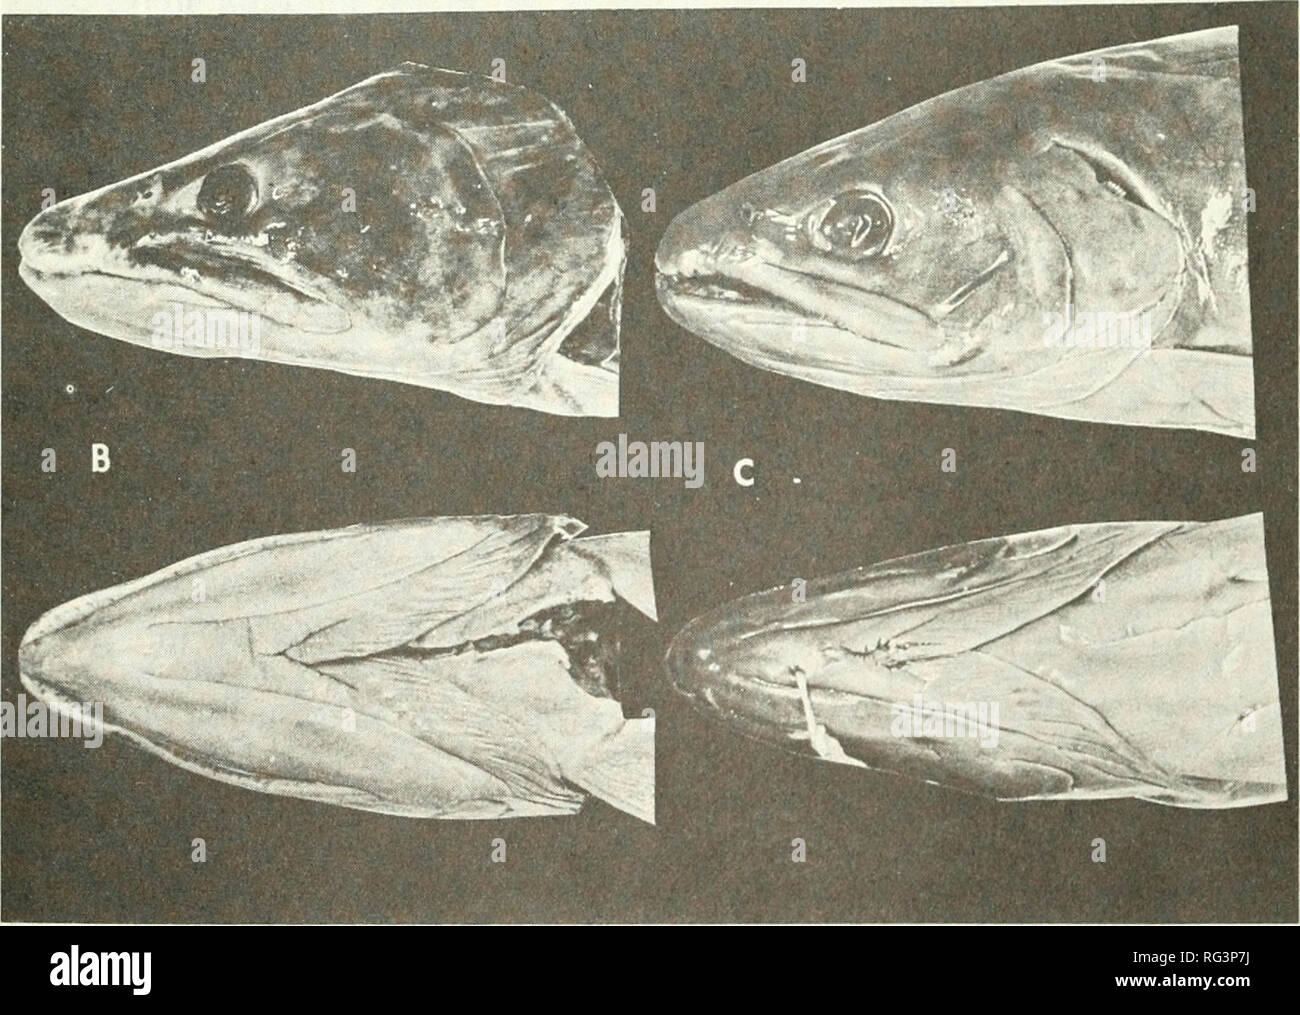 . California fish and game. Fisheries -- California; Game and game-birds -- California; Fishes -- California; Animal Population Groups; Pêches; Gibier; Poissons. FIGURE 2. (A) Holotype of Salmo confluentus Suckley 1858, USNM 1135, head length 173 mm, Puyallup R. near Steilacoom, Washington; (B) lateral and ventral view of head of spawning male Salvelinus confluentus, NMC 66-70, estimated 550 mm standard length, Deer Cr., British Columbia; (C) lateral and ventral view of head of spawning male Salvelinus malma, UMMZ 126507, 295 mm, Karluk R., Kodiak I., Alaska. Photograph by the author.. Please  Stock Photo